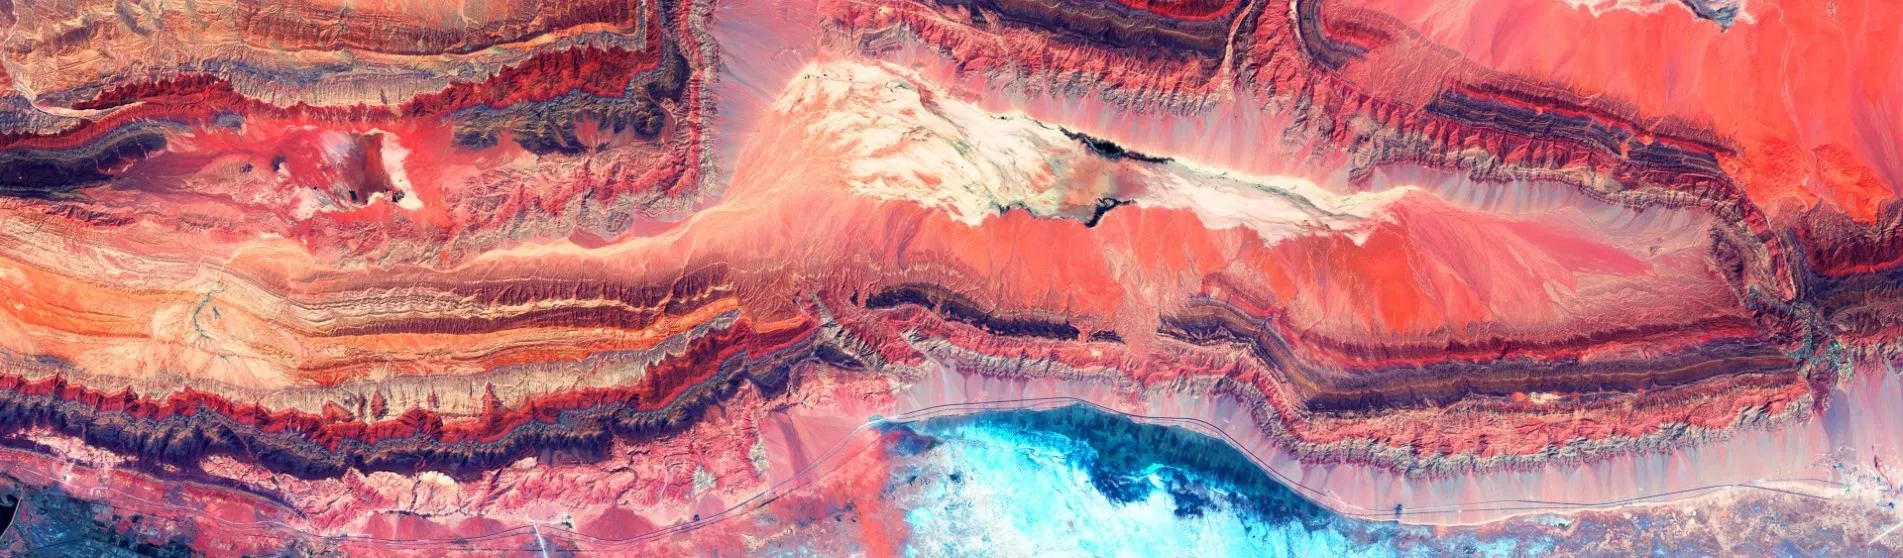 rock faults red image-1903x700